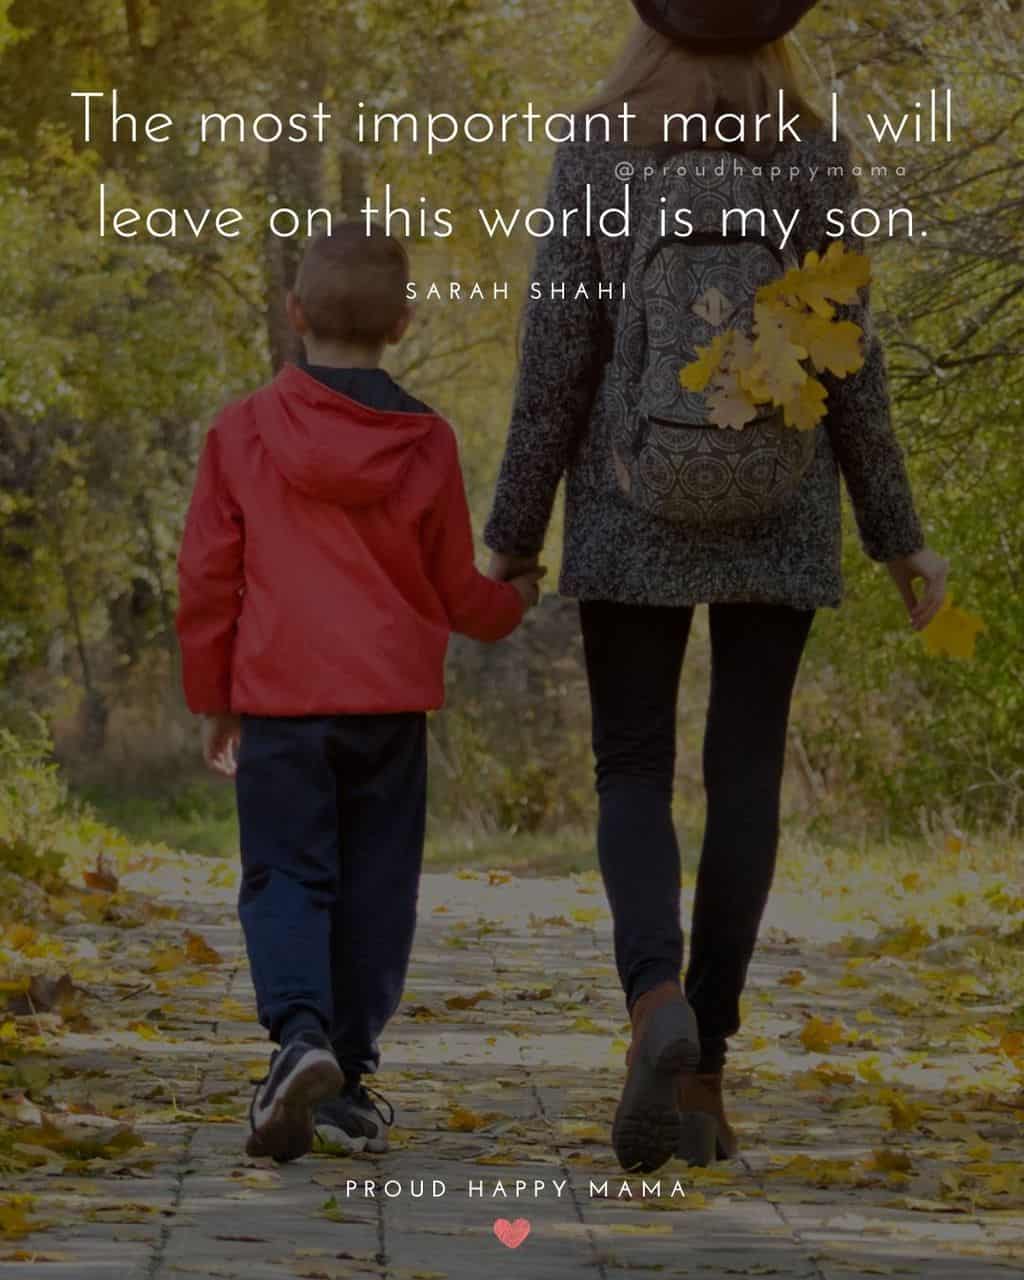 Son Quotes - The most important mark I will leave on this world is my son.’ – Sarah Shahi